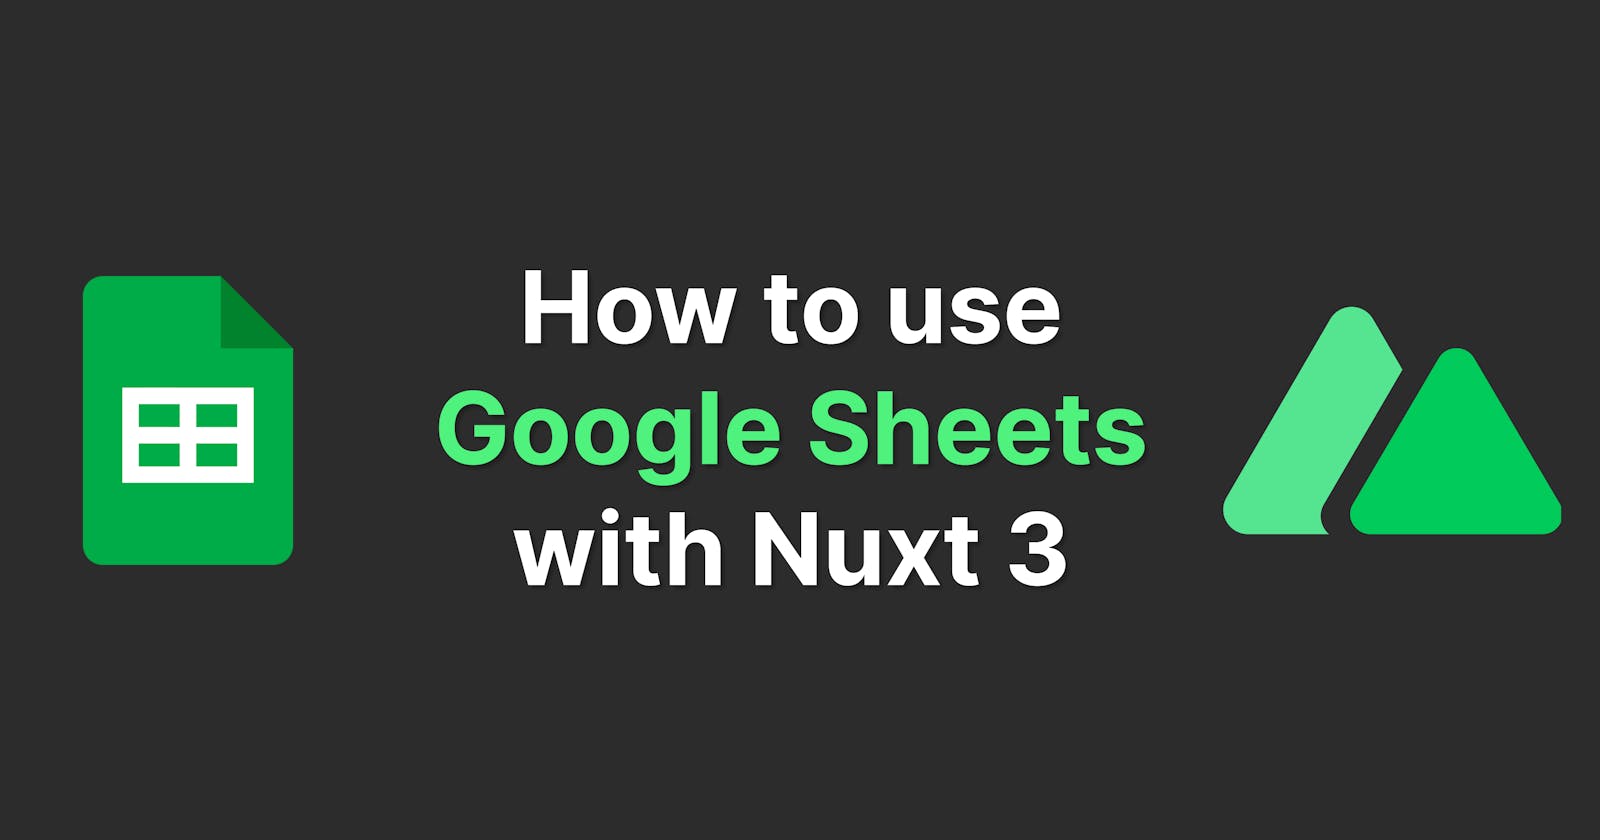 How to use Google Sheets with Nuxt 3